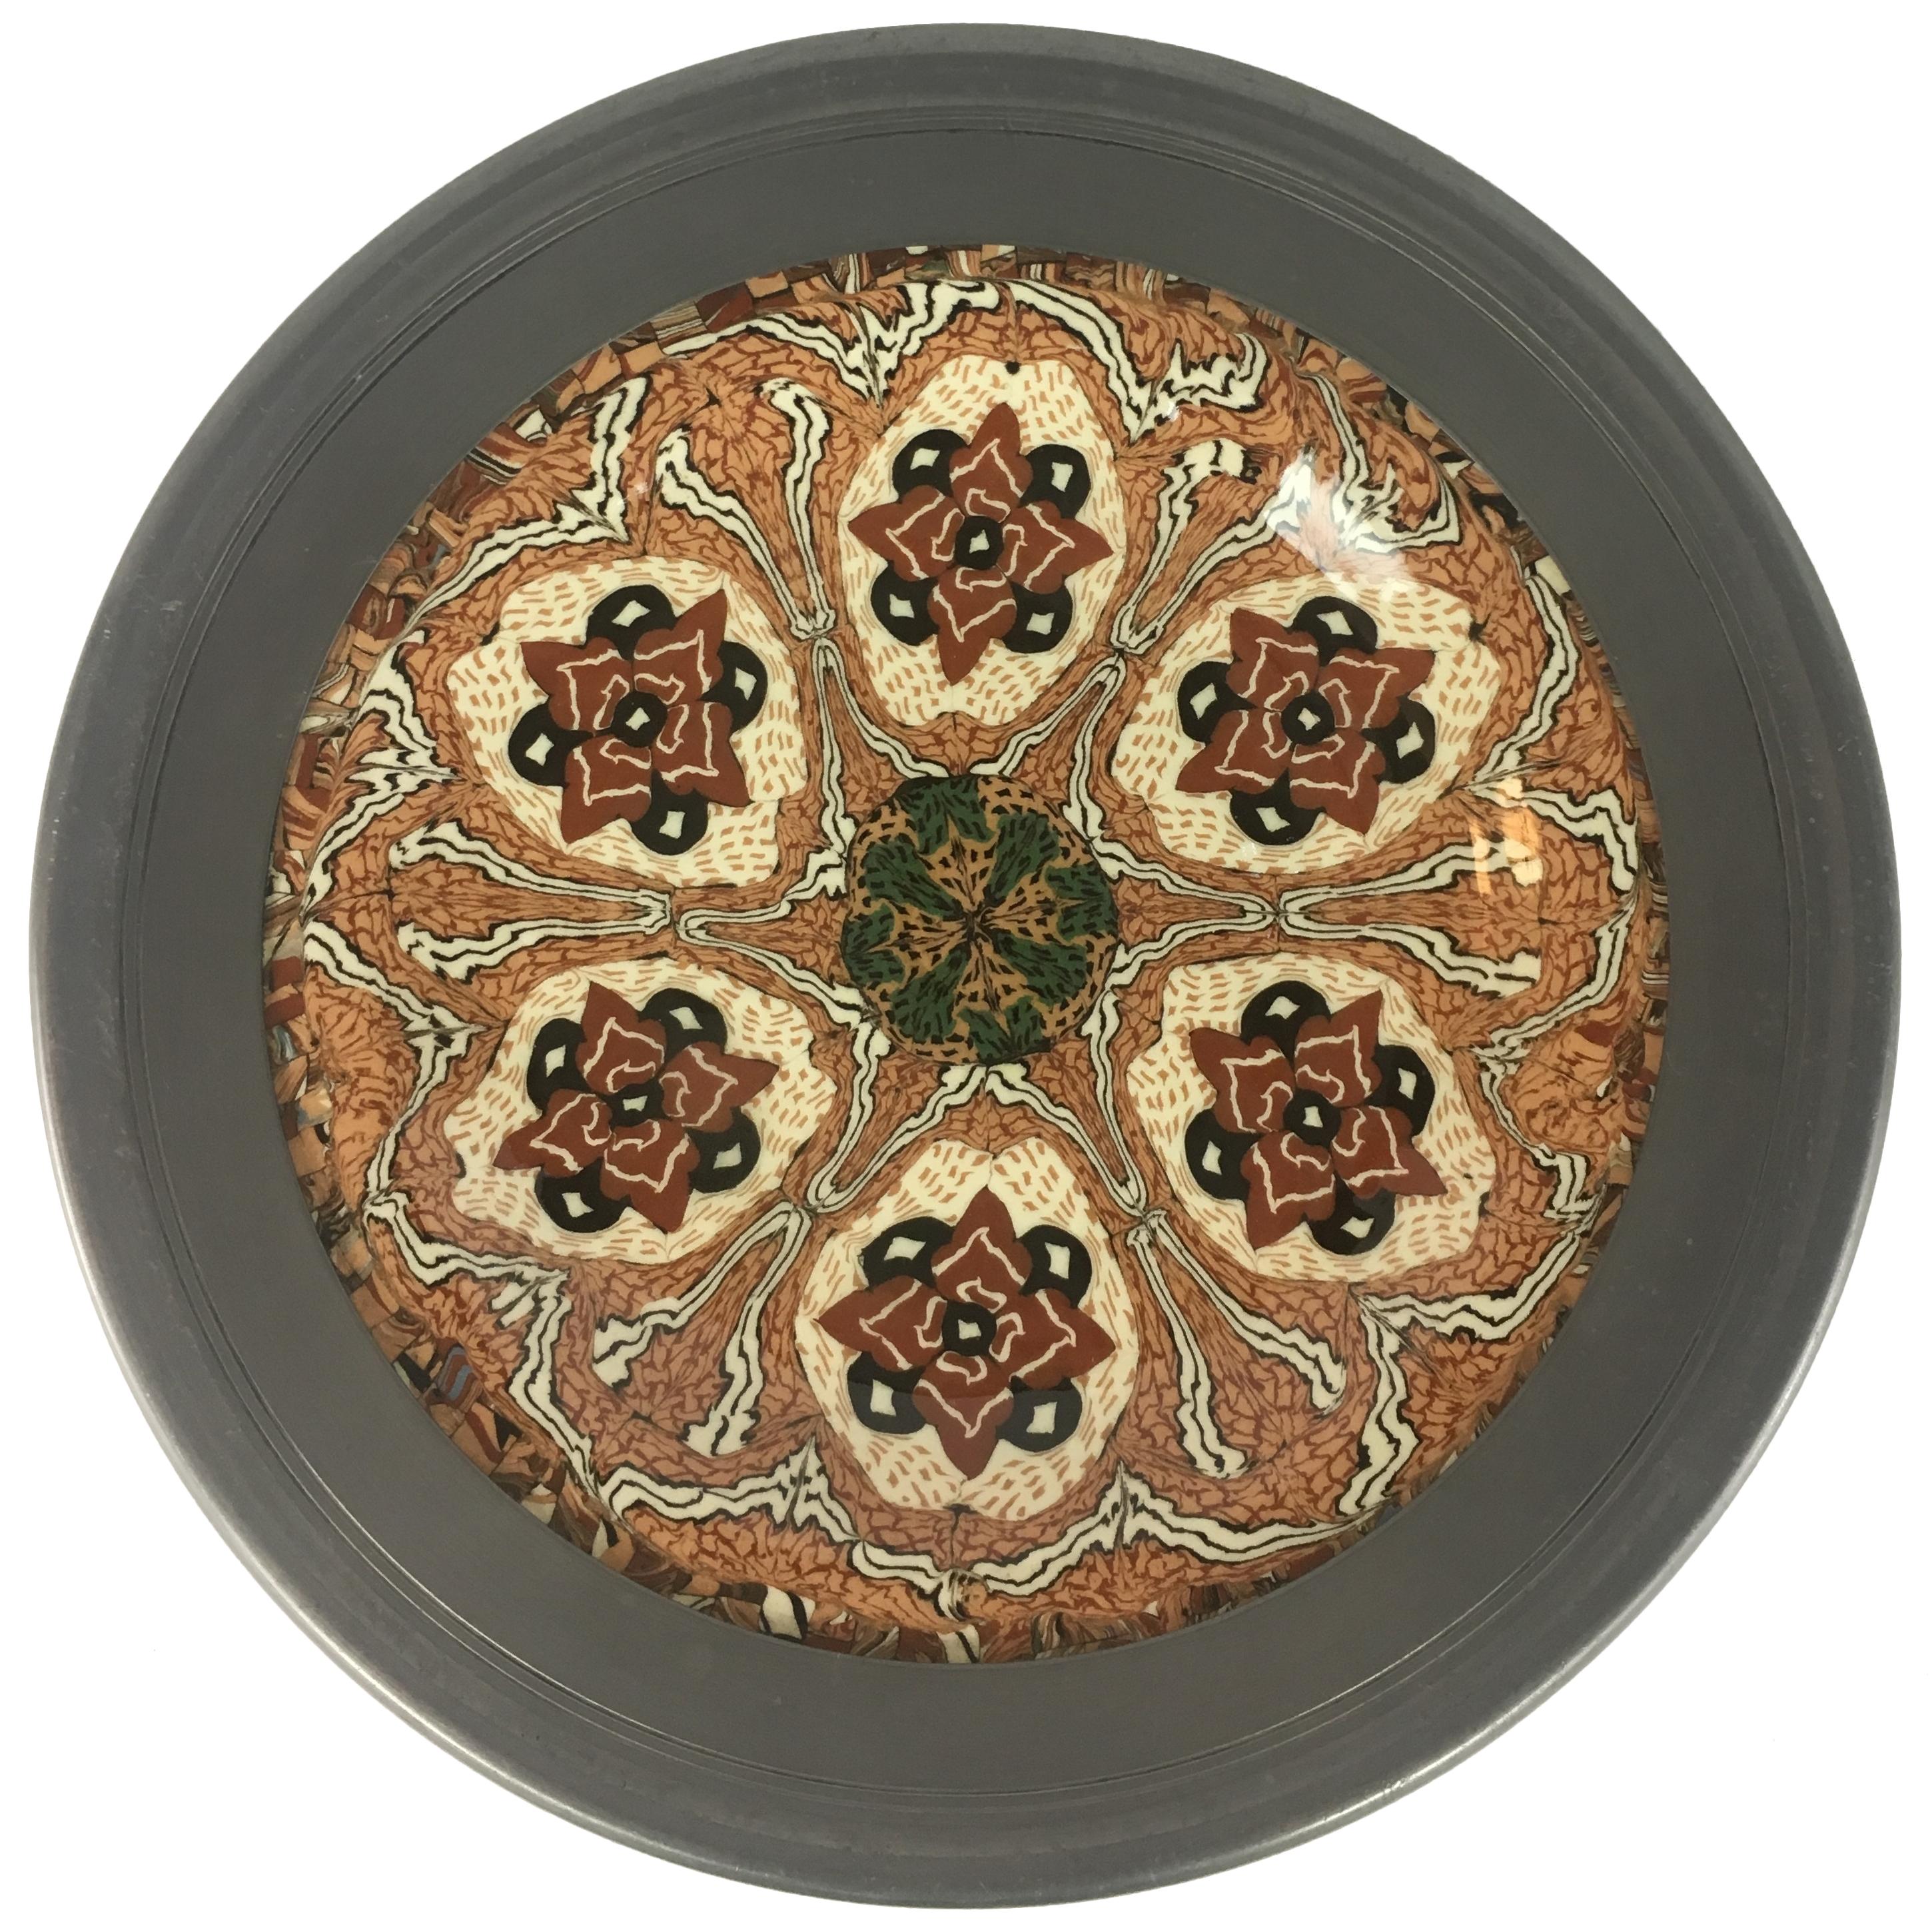 French Vallauris Clay Mosaic Plate by Master Ceramicist Jean Gerbino